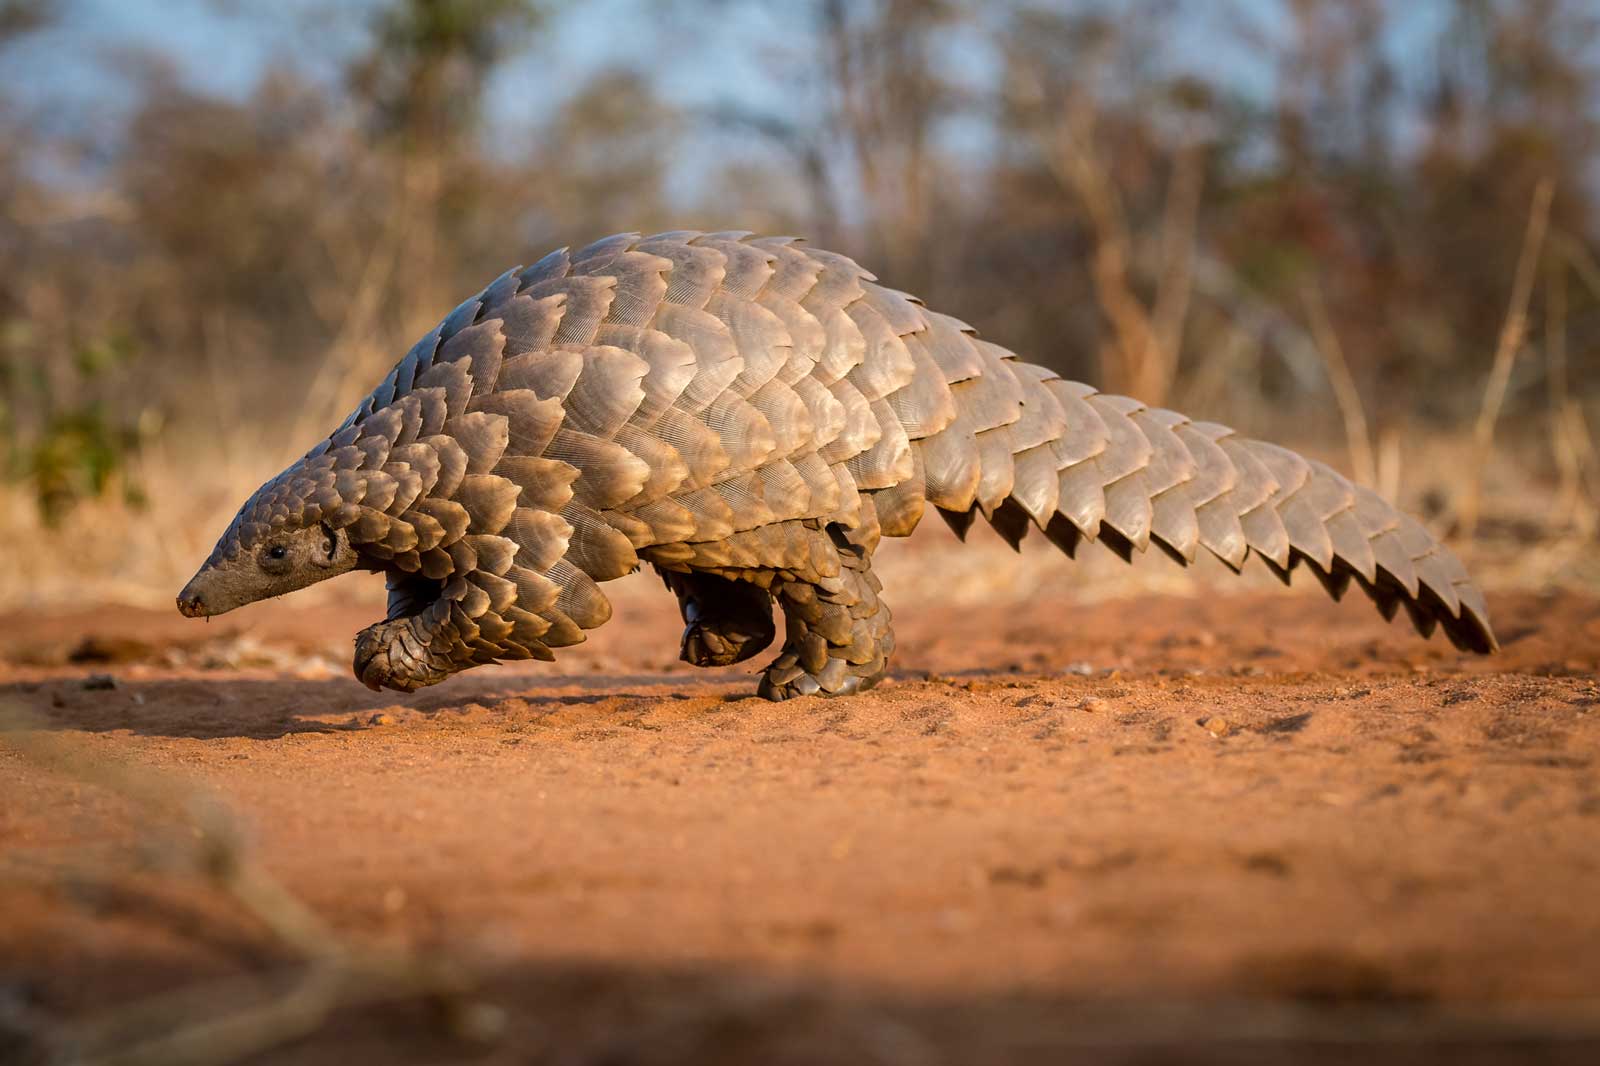 Biden vowed to save pangolins from extinction with sanctions